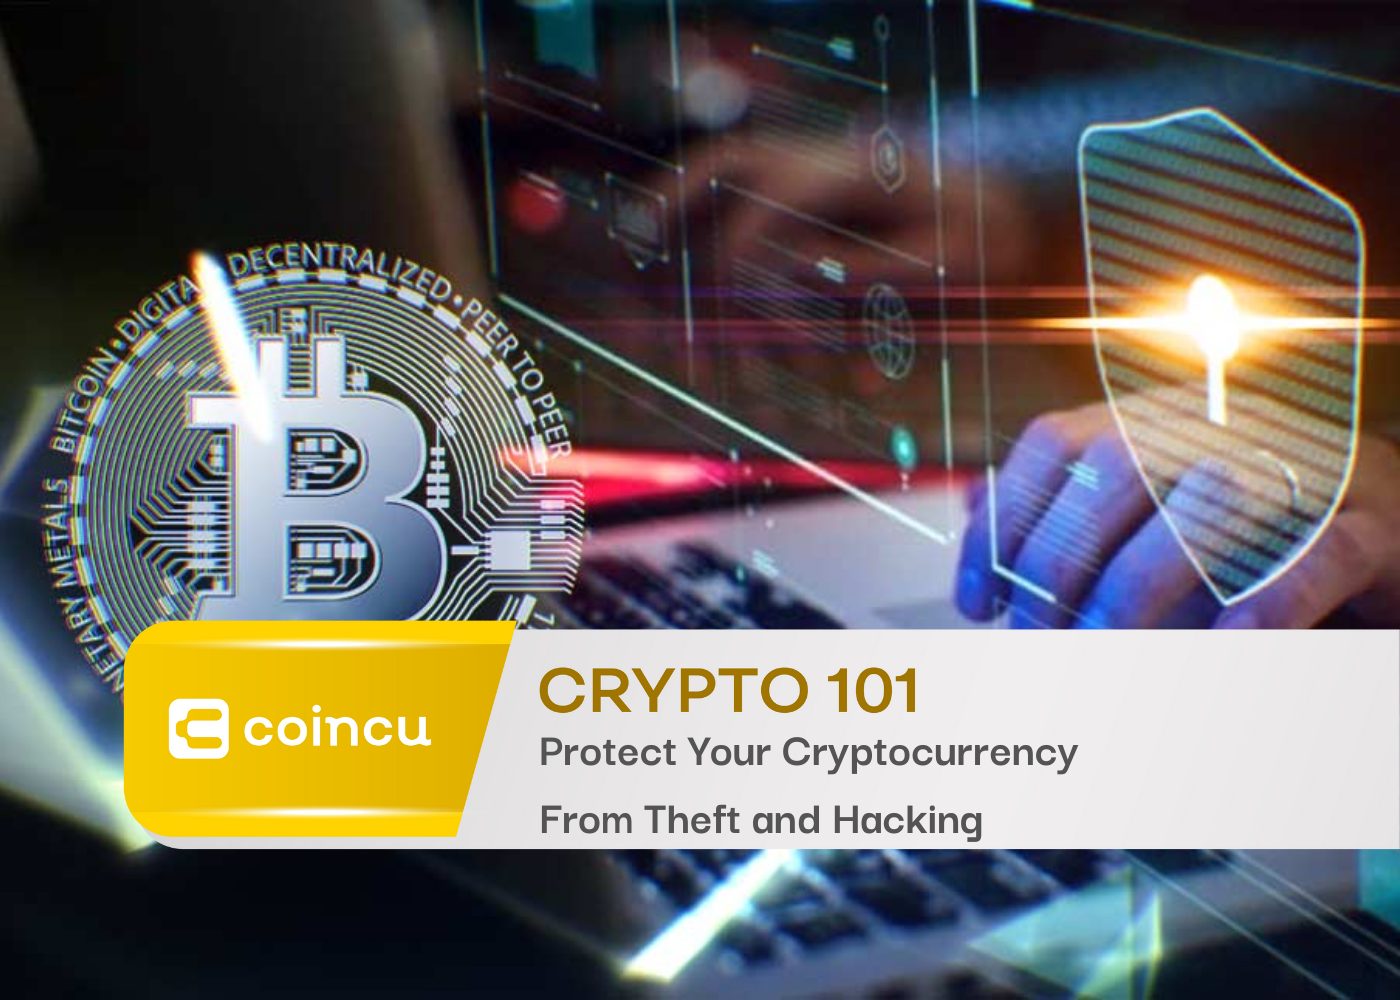 Protect Your Cryptocurrency From Theft and Hacking